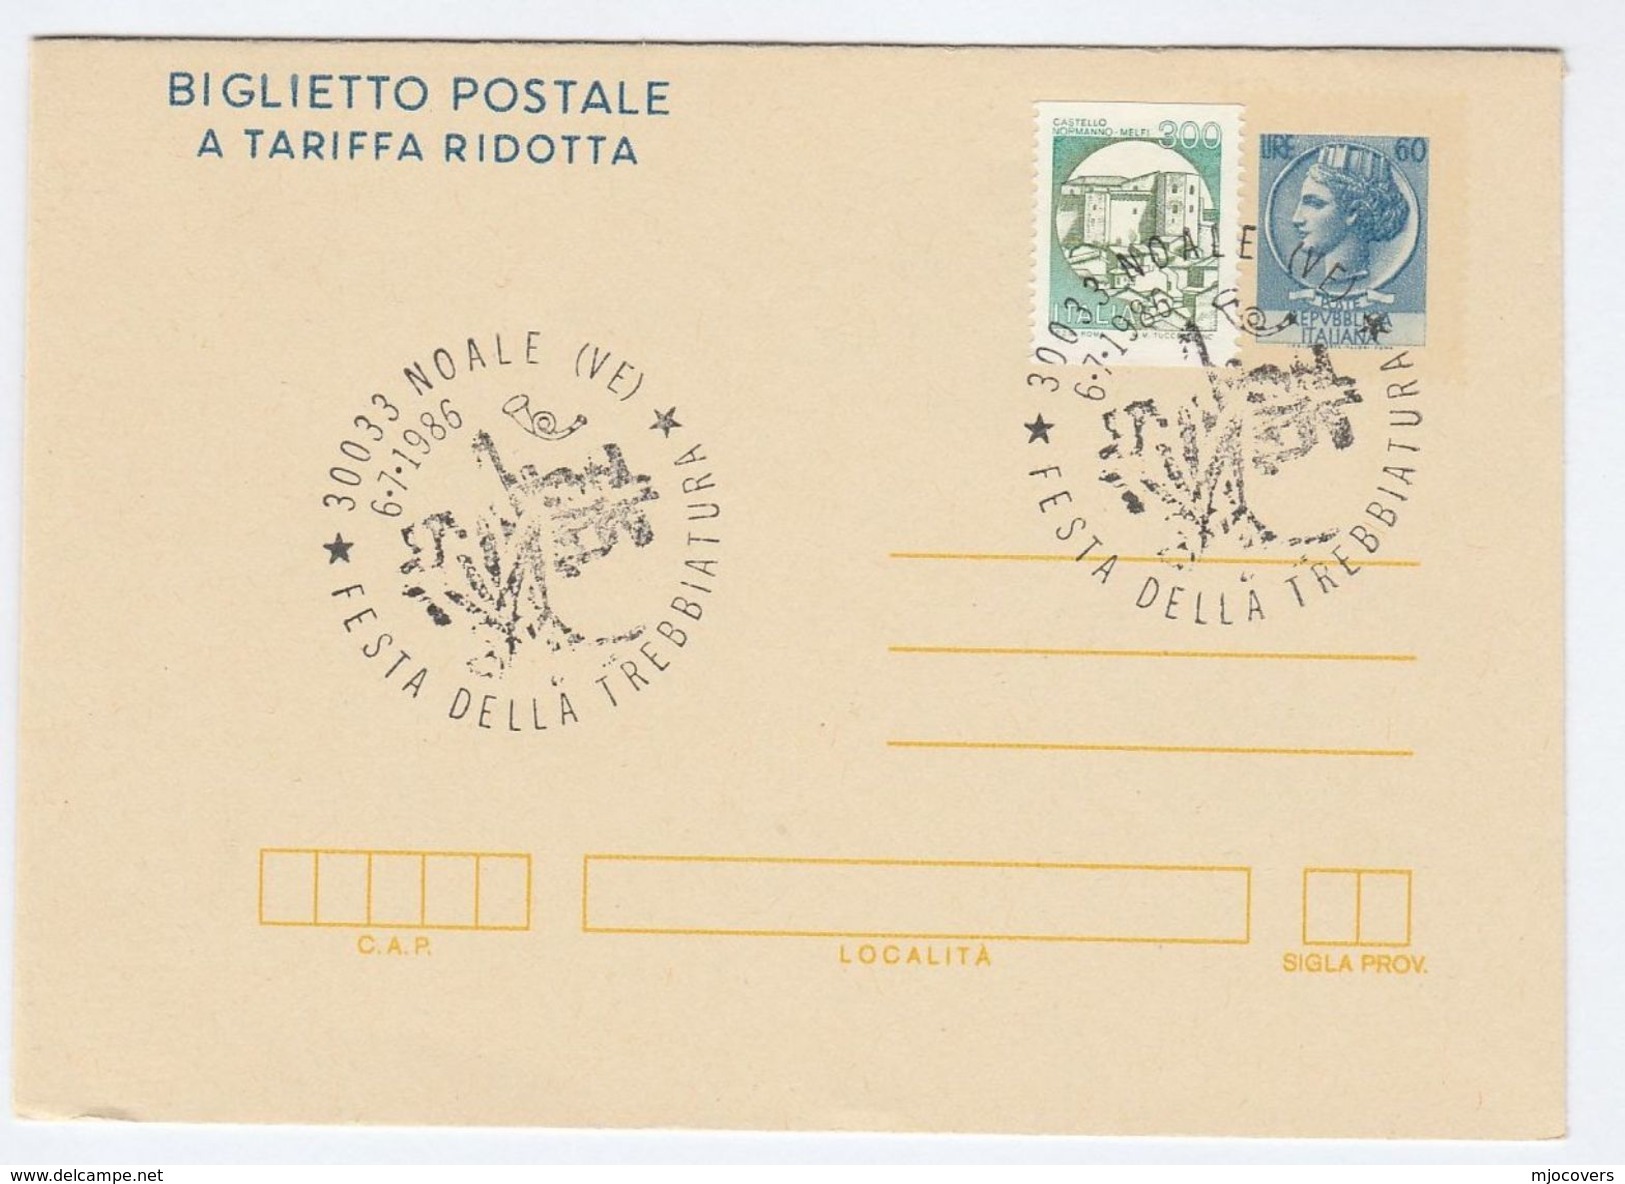 1986 NOALE THRESHING FESTIVAL  EVENT Postal STATIONERY LETTERSHEET Italy Stamps Uprated Cover Agriculture Farming - Agriculture